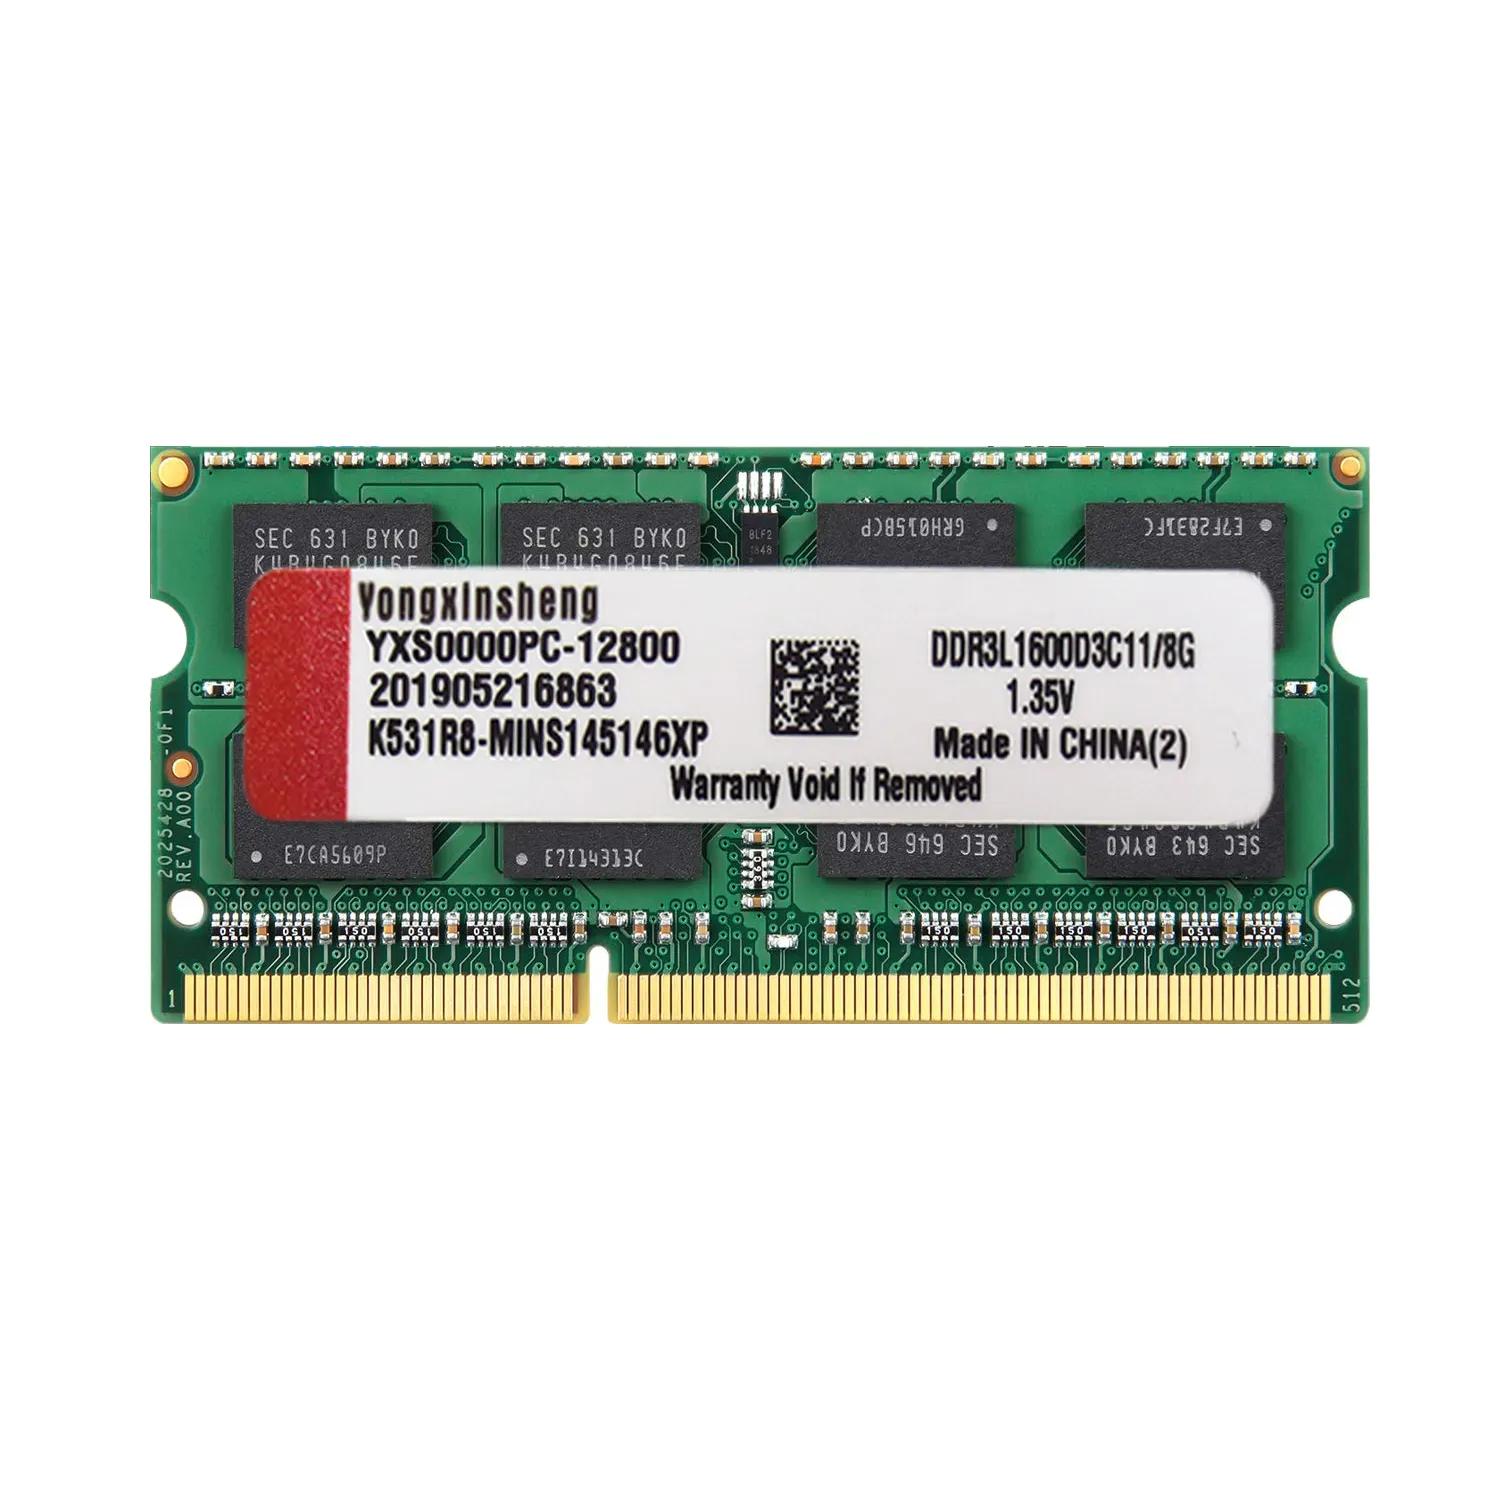 Factory hot sales DDR3 4GB 8GB 16GB PC3-12800 Ram Memory 1600mhz Notebook Best price high quality